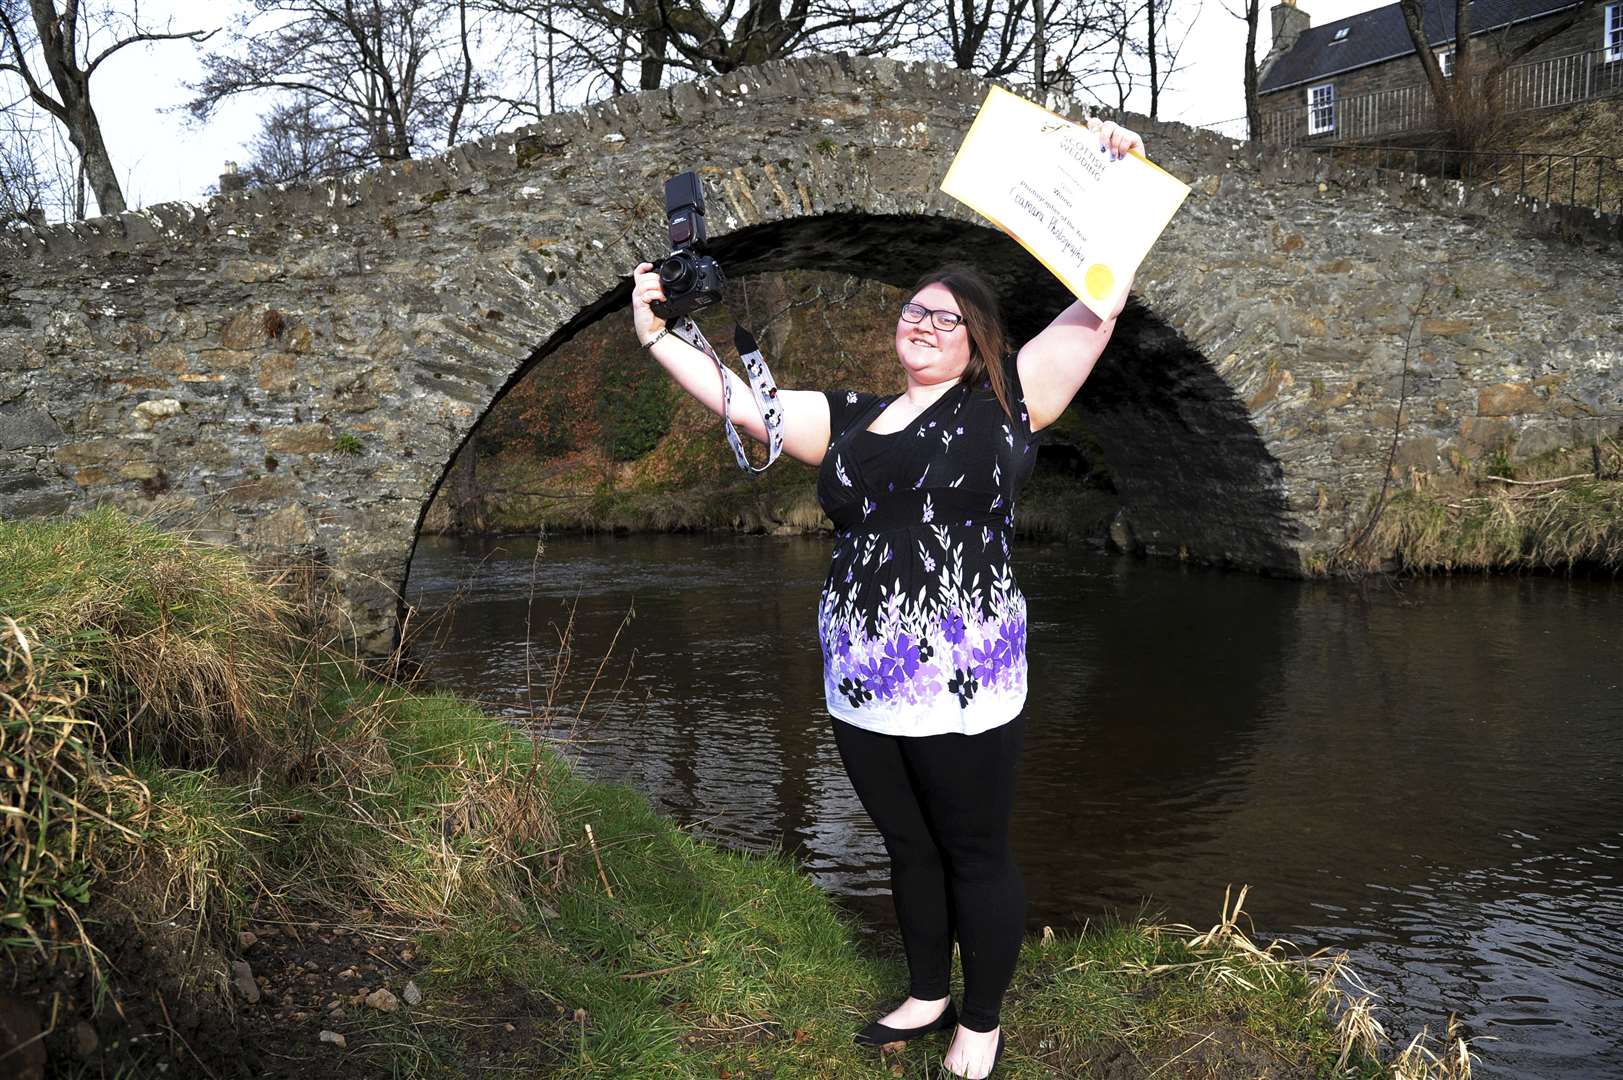 Morag Martin, from Keith, won Scottish Wedding Photographer of the Year award. She is pictured here beside the historic Auld Brig in the town, where she does a lot of her work. Picture: Eric Cormack